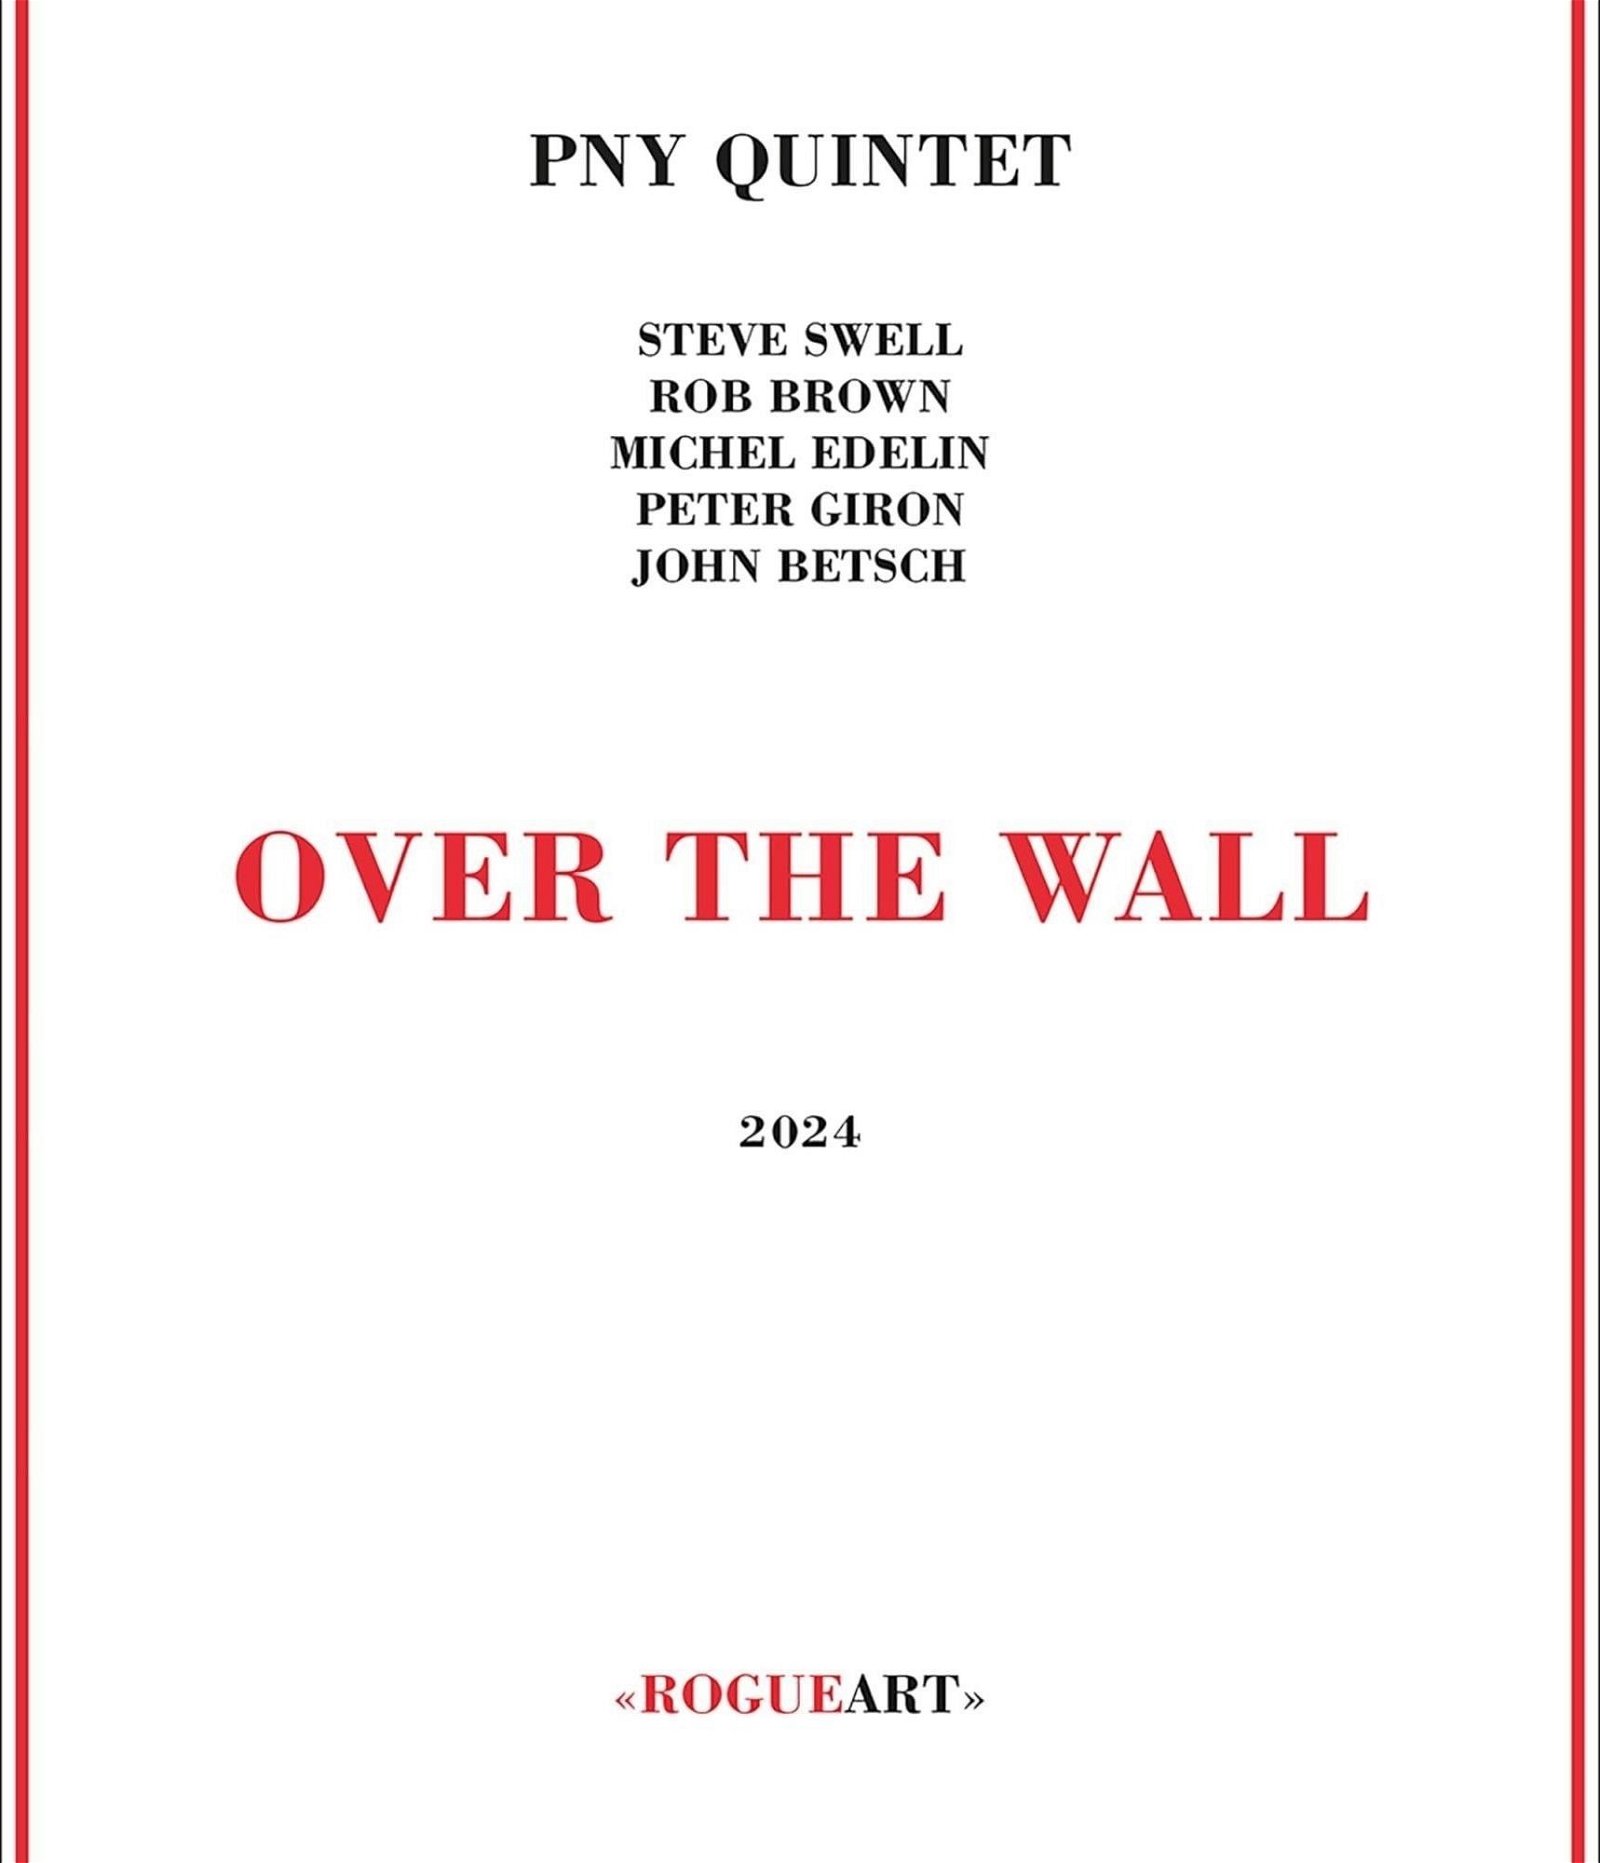 CD Shop - PNY QUINTET OVER THE WALL